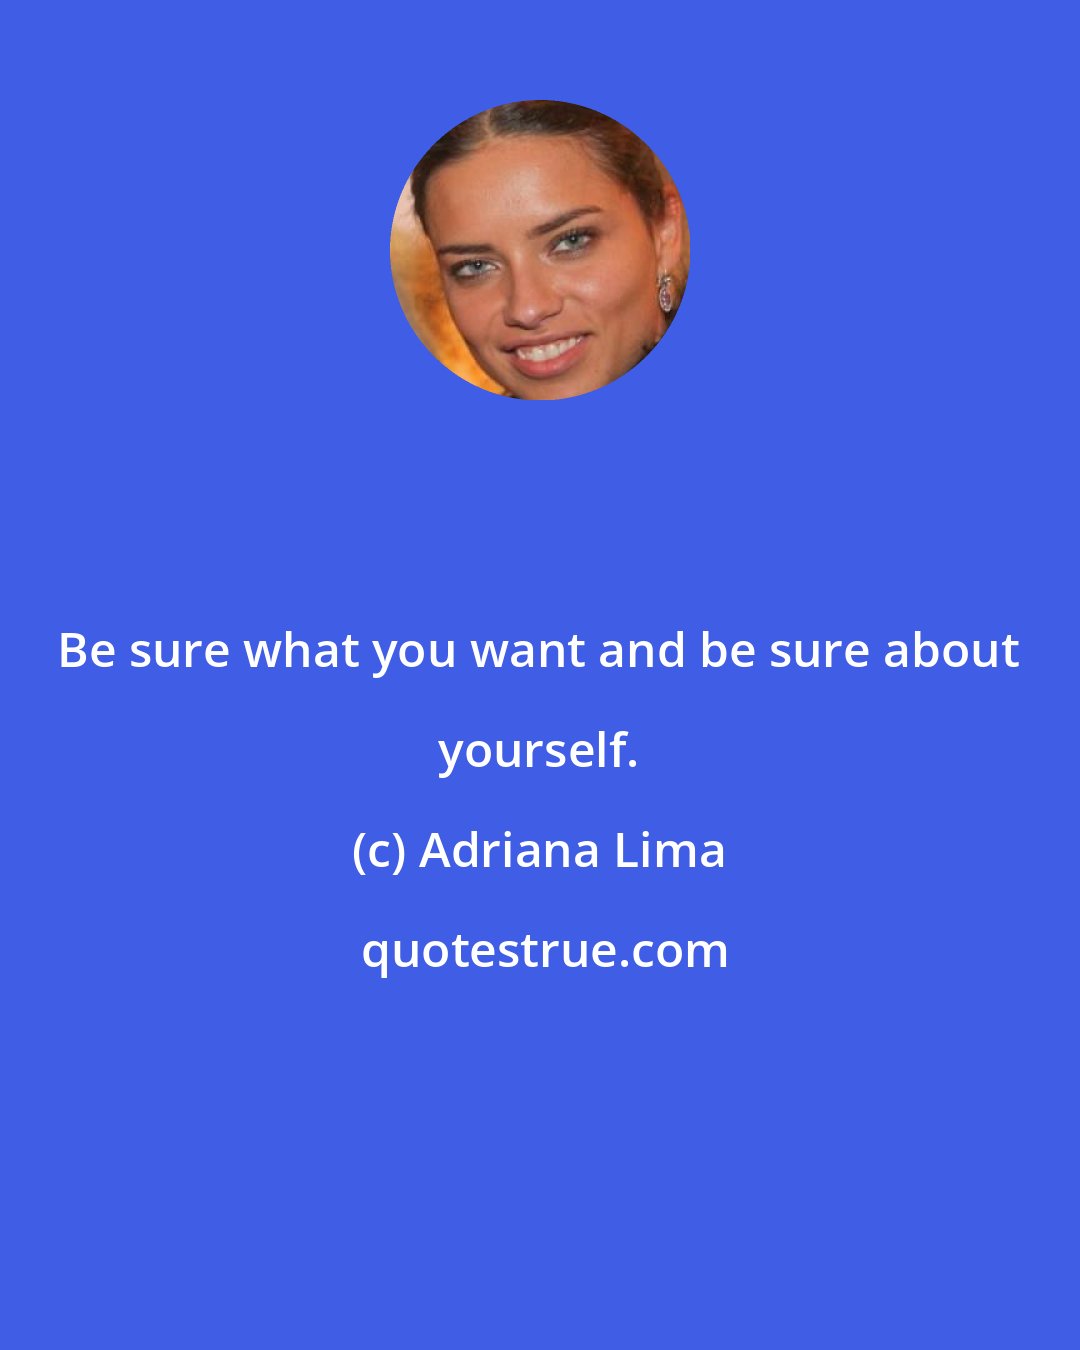 Adriana Lima: Be sure what you want and be sure about yourself.